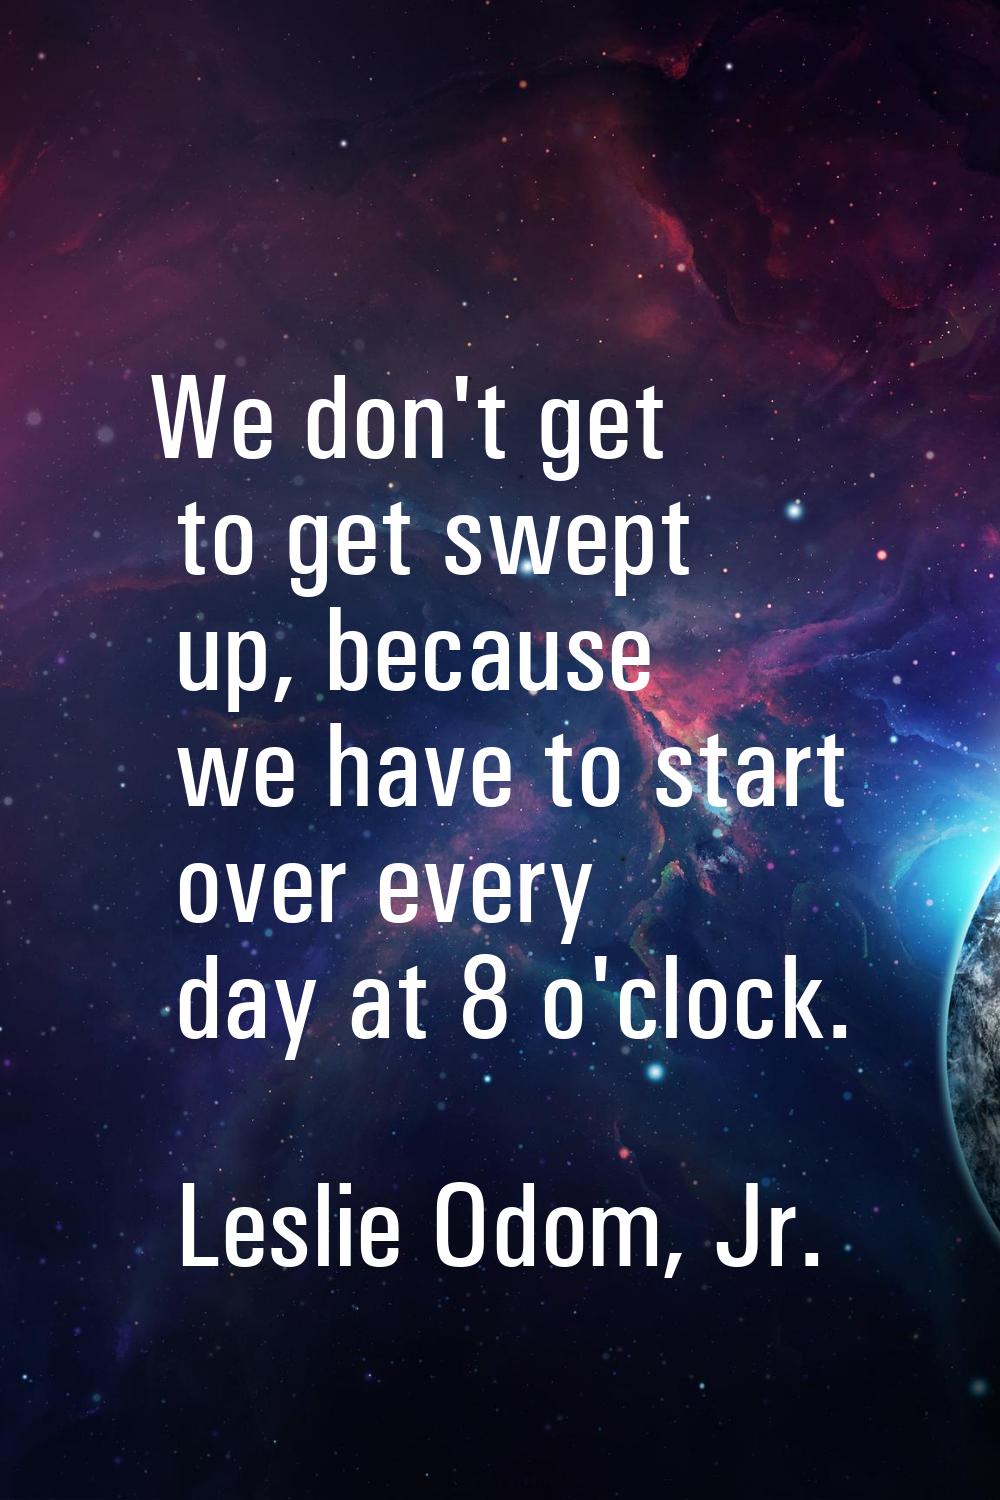 We don't get to get swept up, because we have to start over every day at 8 o'clock.